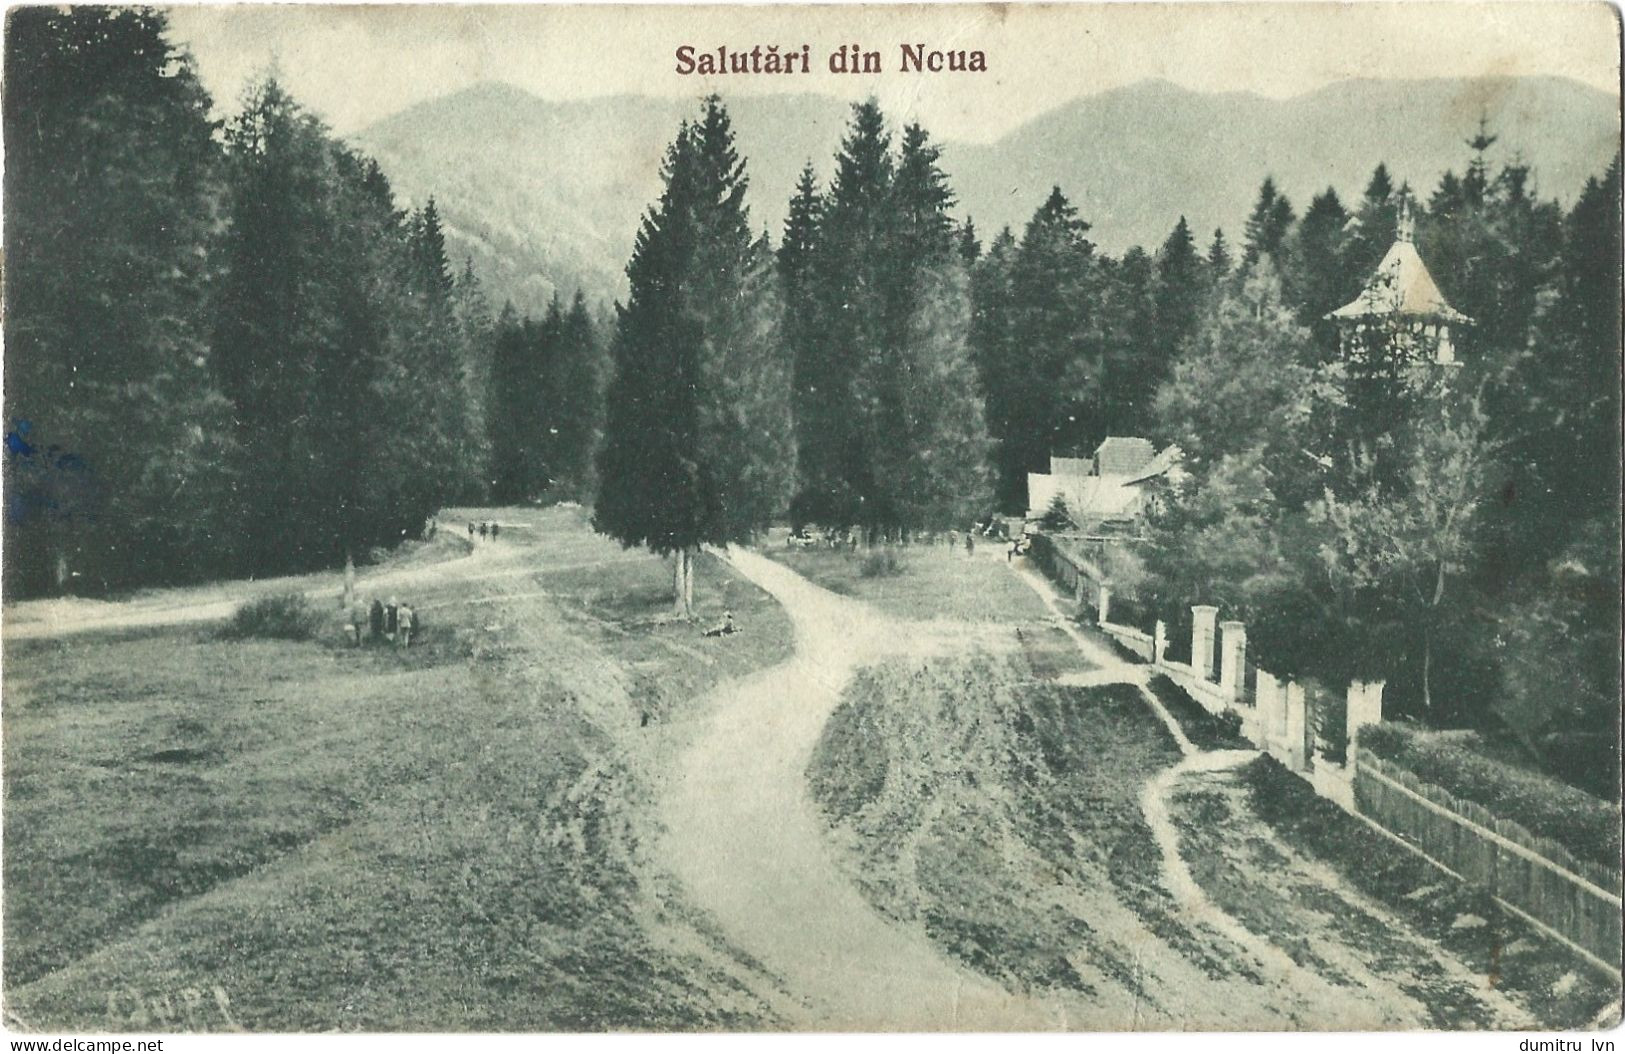 ROMANIA 1929 GREETINGS FROM NOUA (BRASOV), BUILDINGS, HOUSES, PEOPLE, FOREST, MOUNTAIN LANDSCAPE - Rumänien